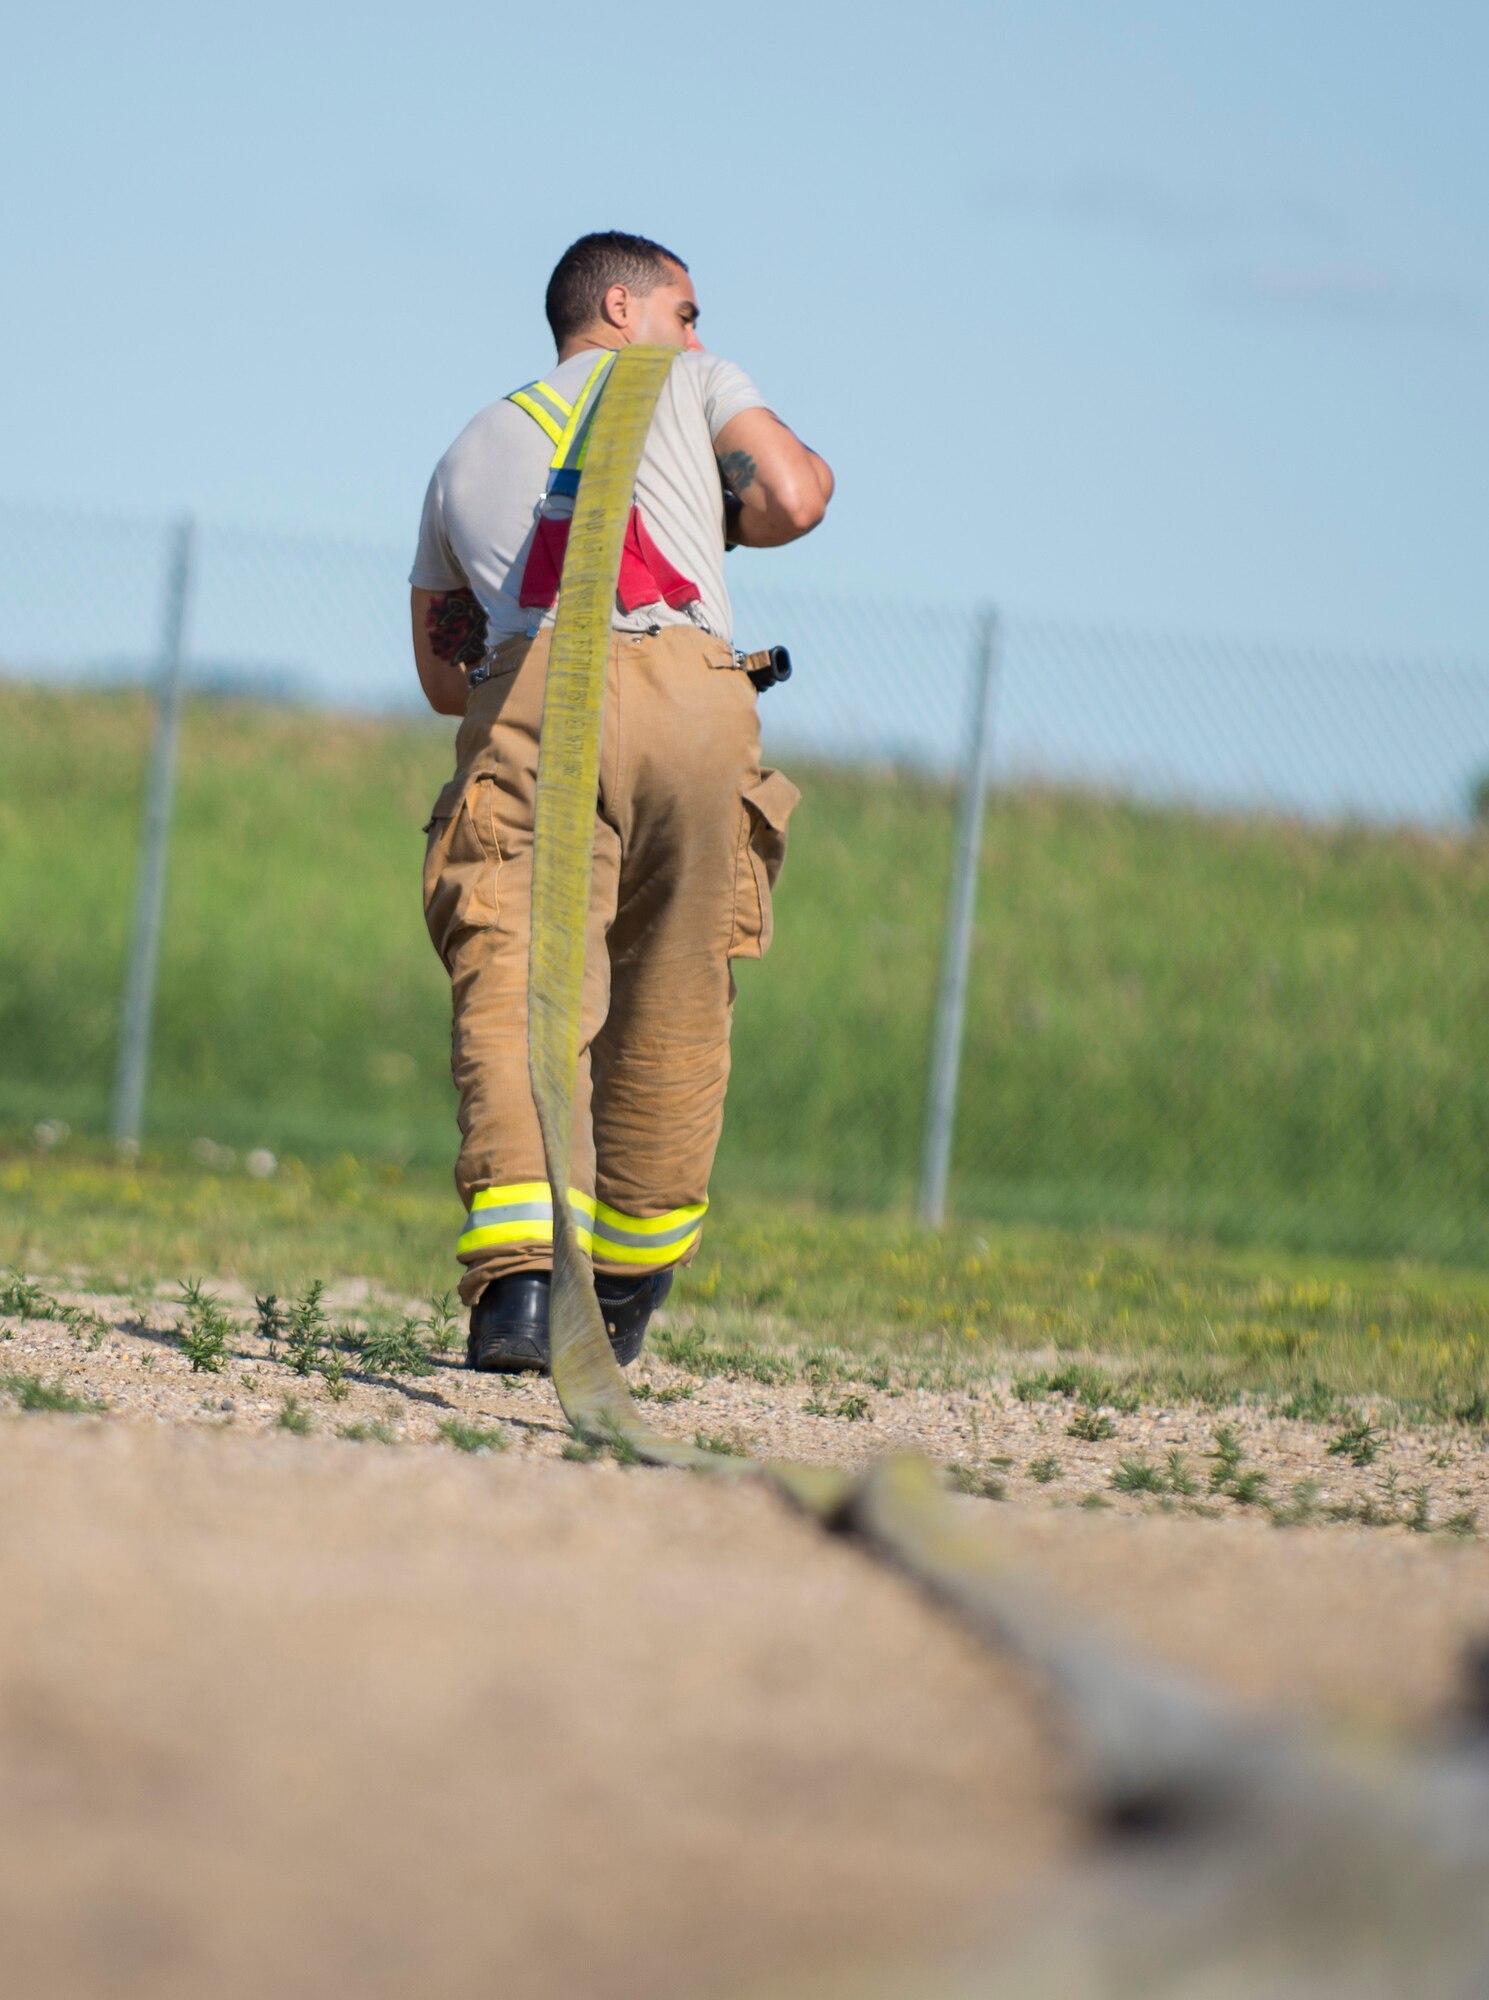 Airman 1st Class Roberto Vazquez, 5th Civil Engineer Squadron firefighter, pulls a fire hose in preparation for live fire exercise at Minot Air Force Base, N.D., July 8, 2016. The fire department trains regularly to maintain readiness. (U.S. Air Force photo/Airman 1st Class Christian Sullivan)